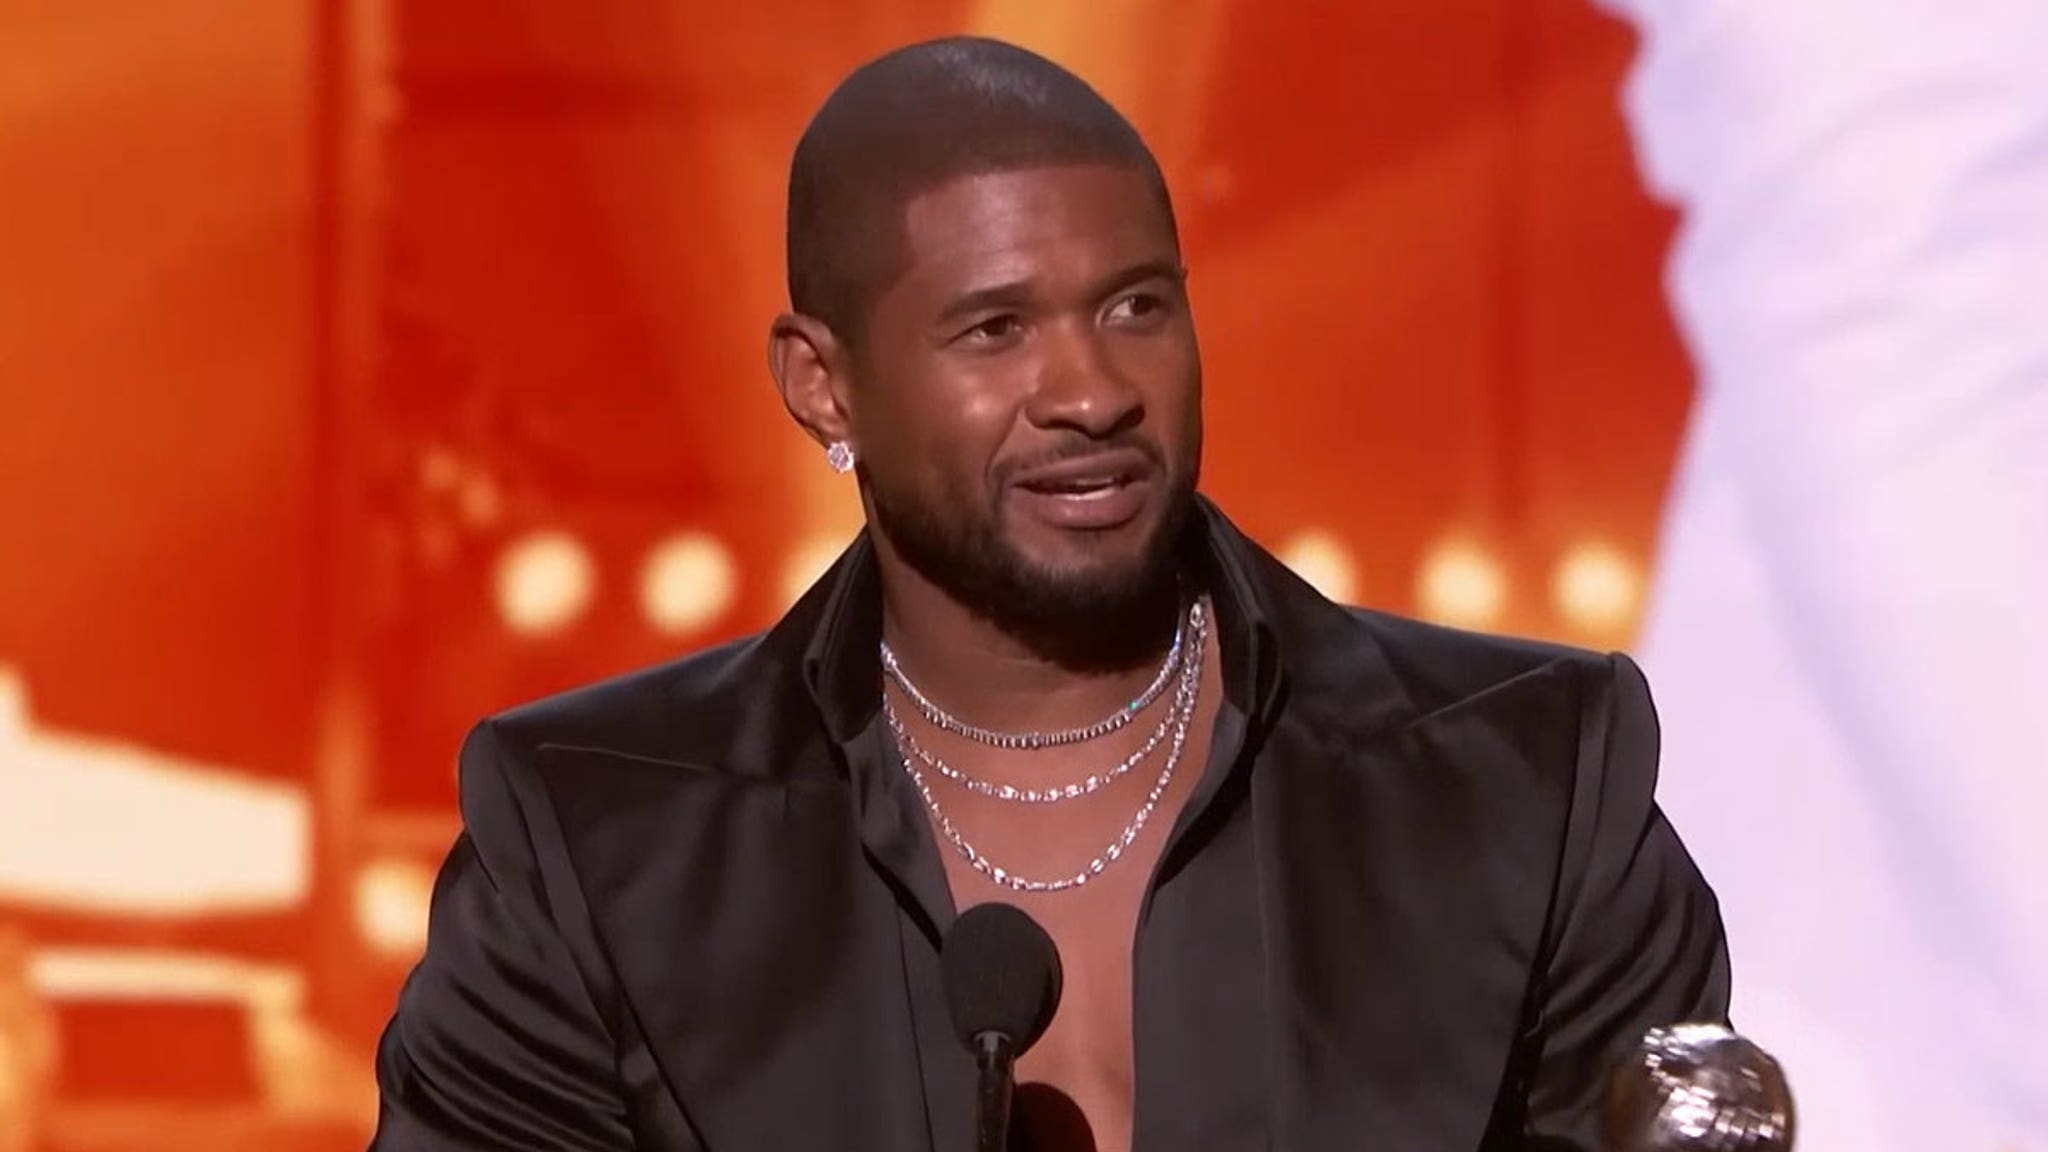 Usher Delivers Emotional Acceptance Speech at NAACP Image Awards #Usher